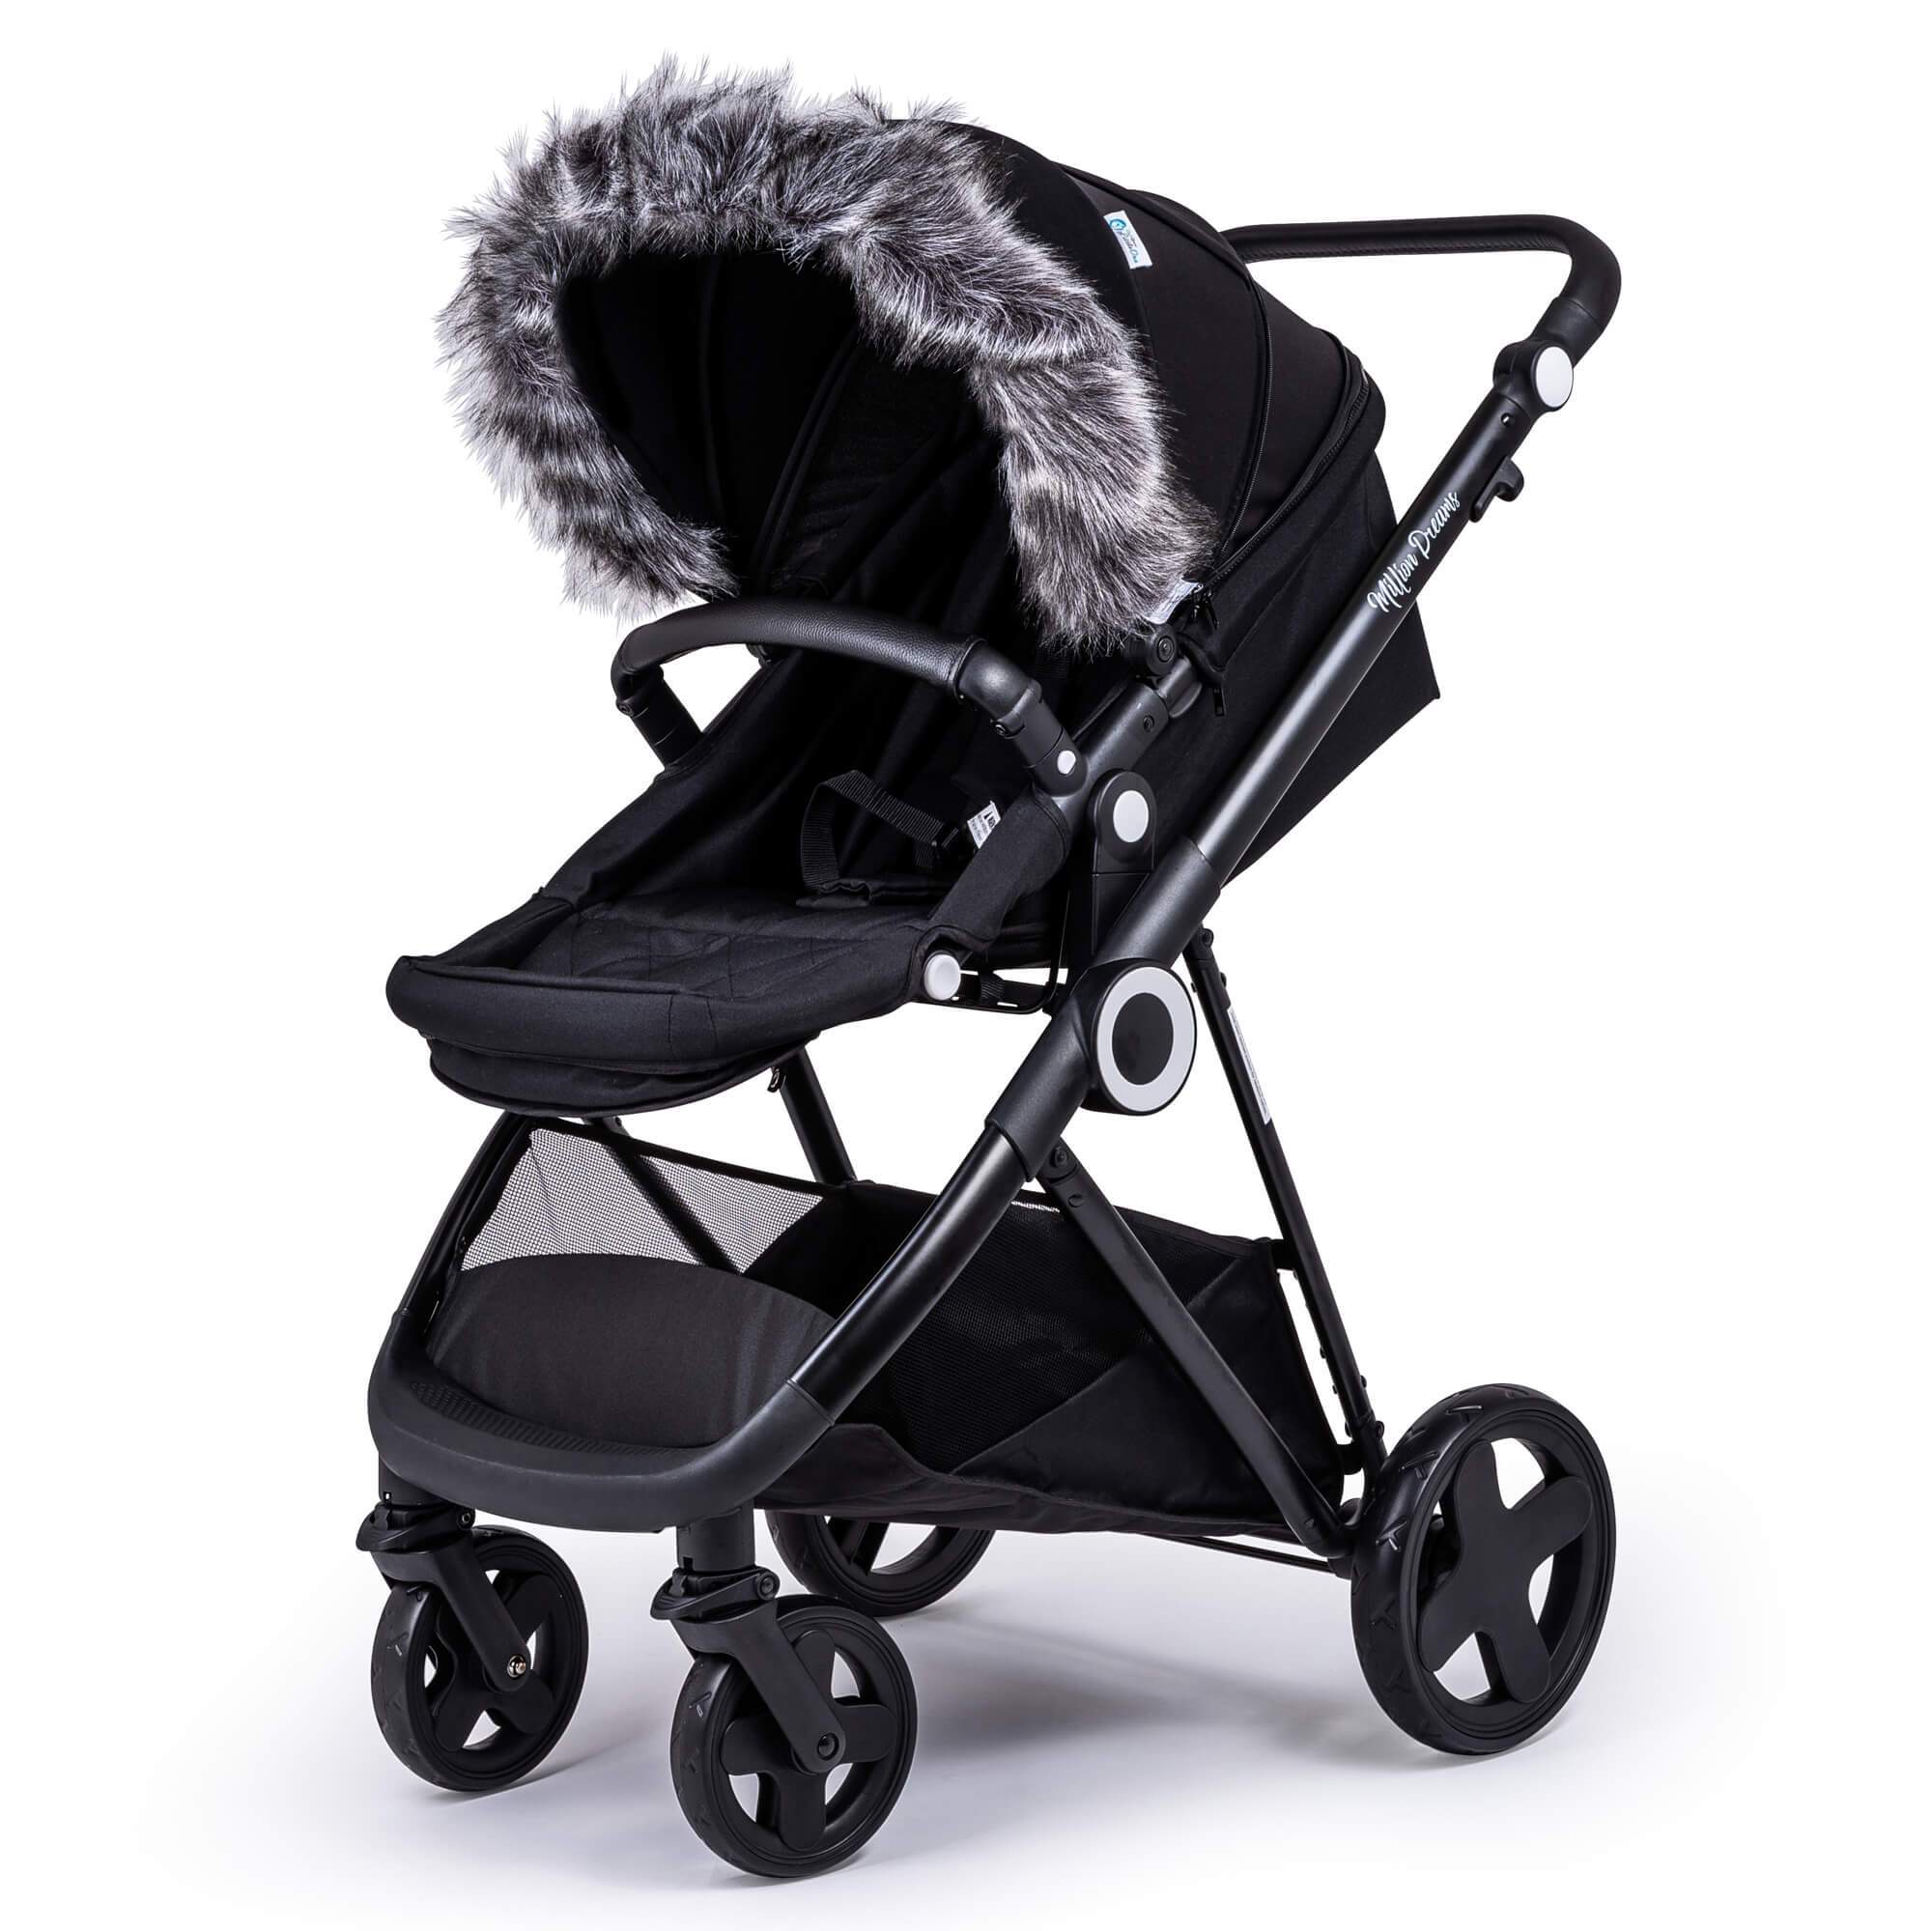 Pram Fur Hood Trim Attachment for Pushchair Compatible with Out 'n' About - Dark Grey / Fits All Models | For Your Little One